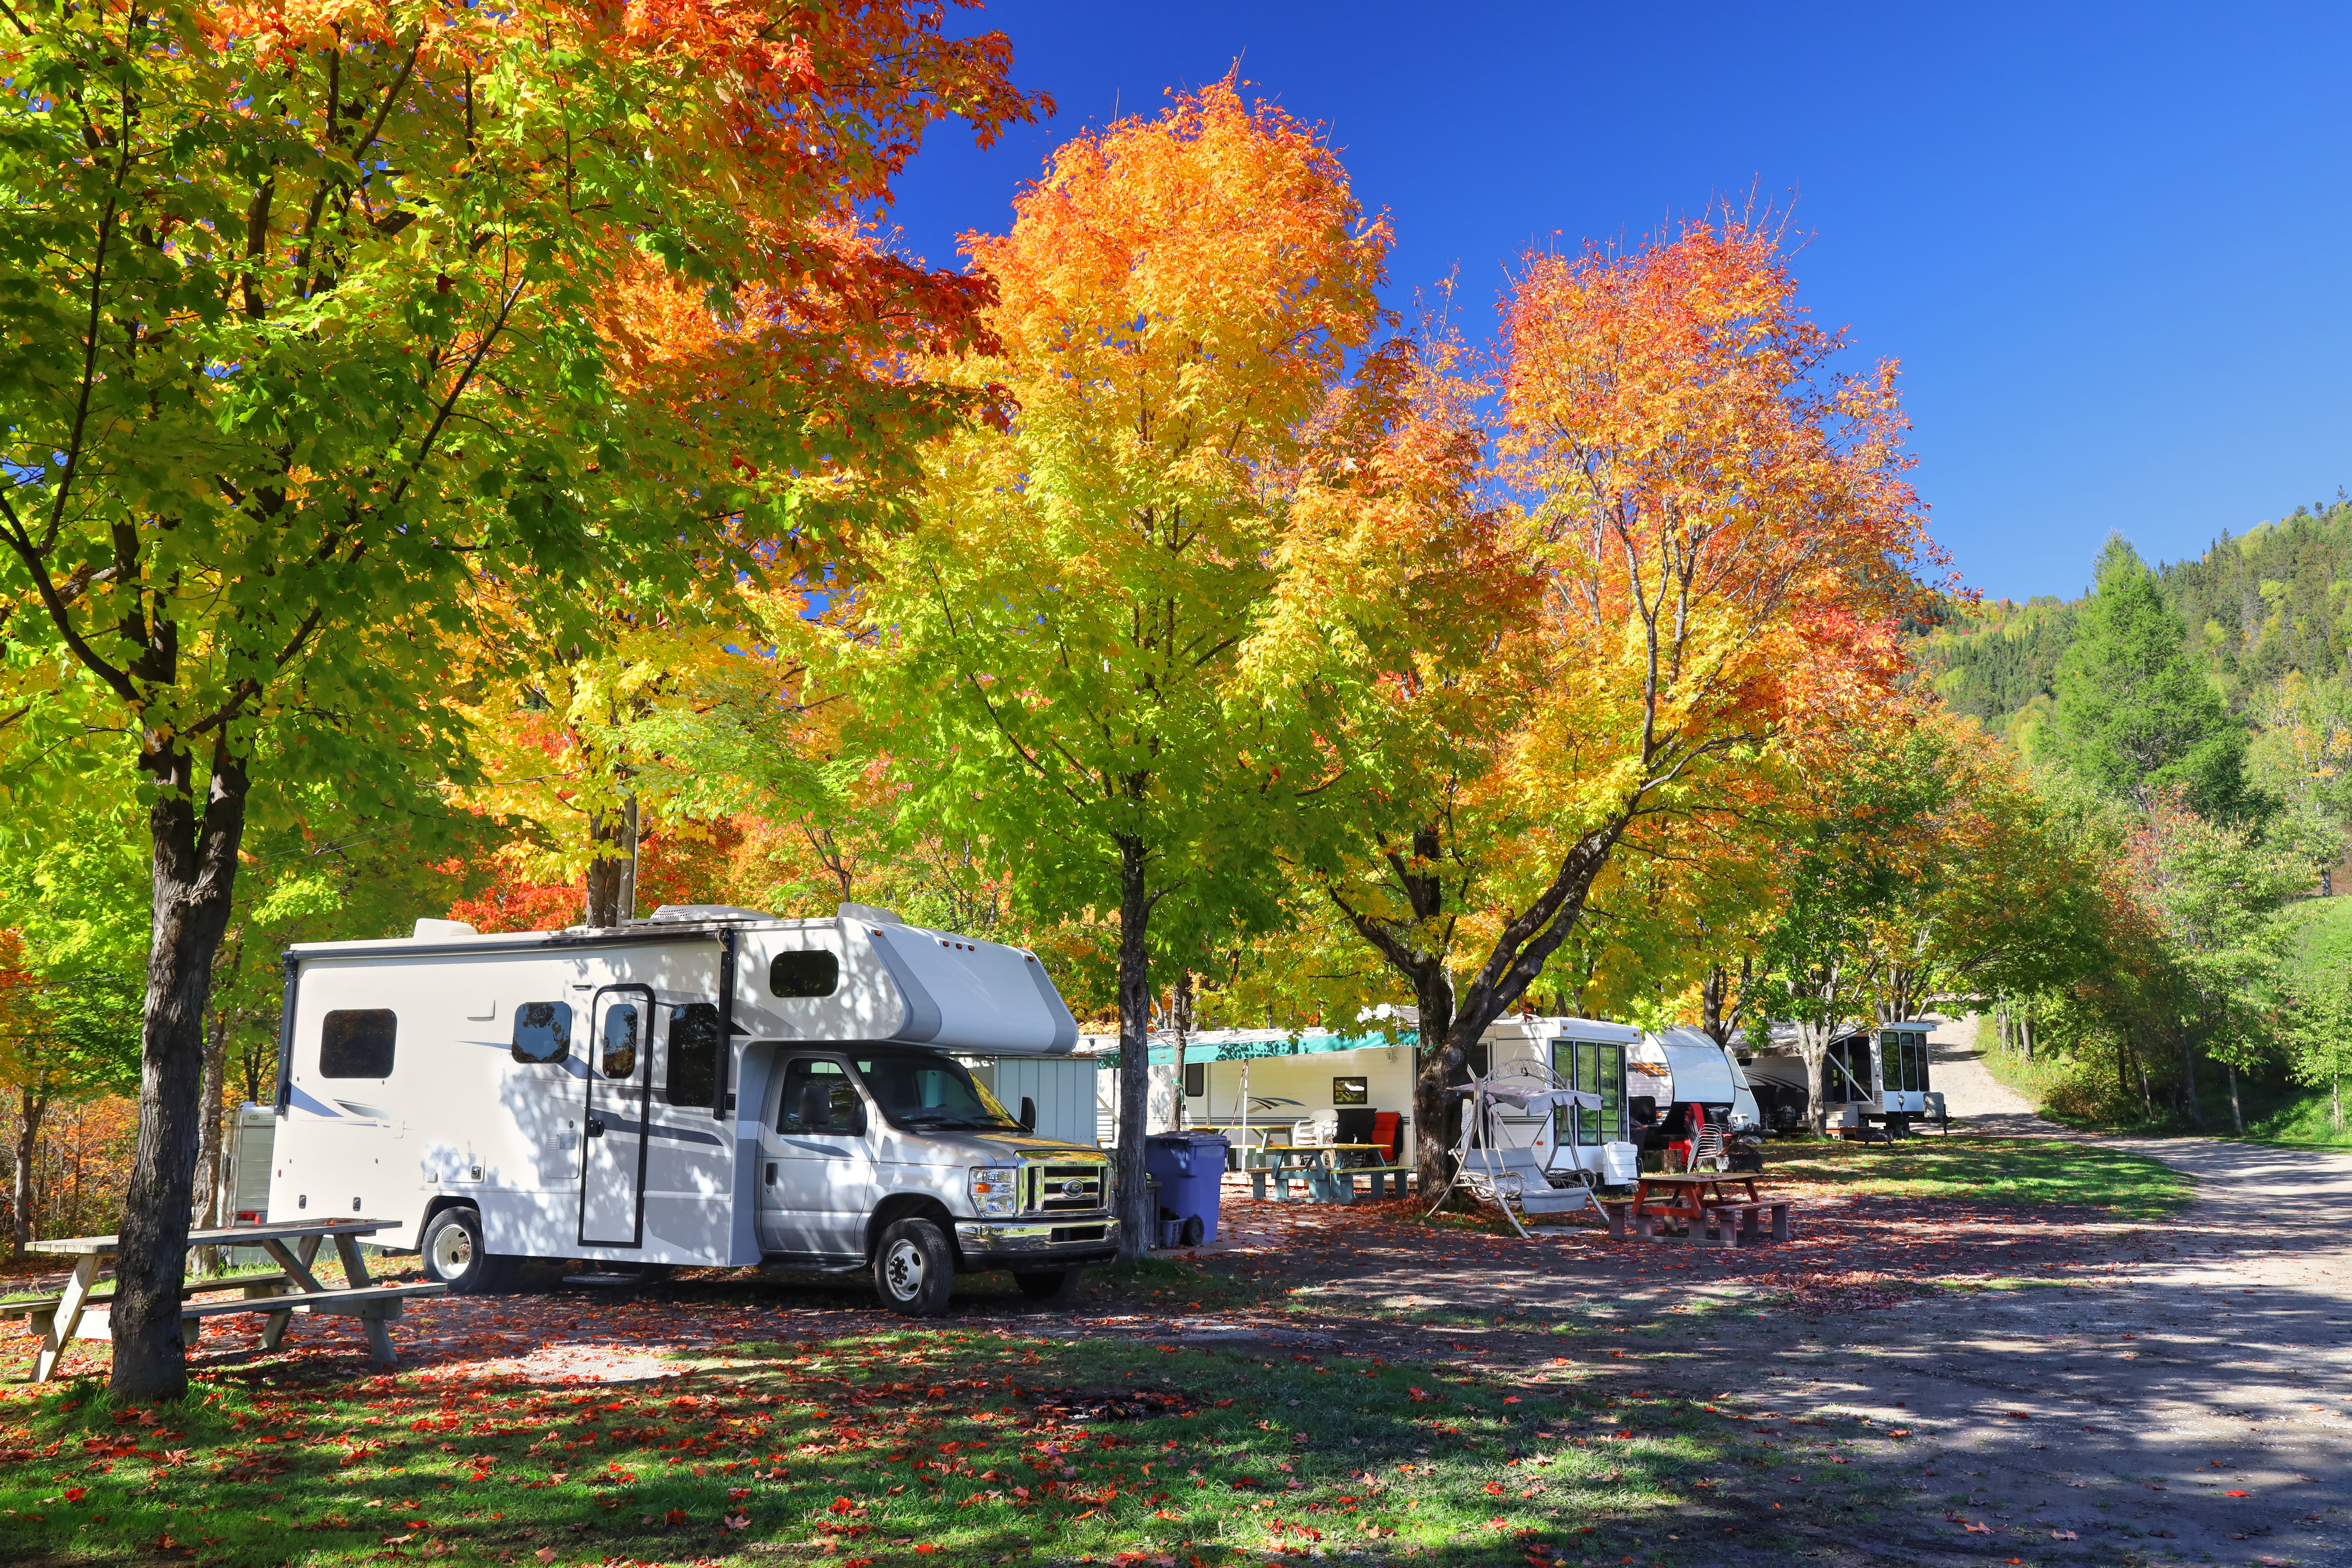 How CampersCard Benefits Campgrounds